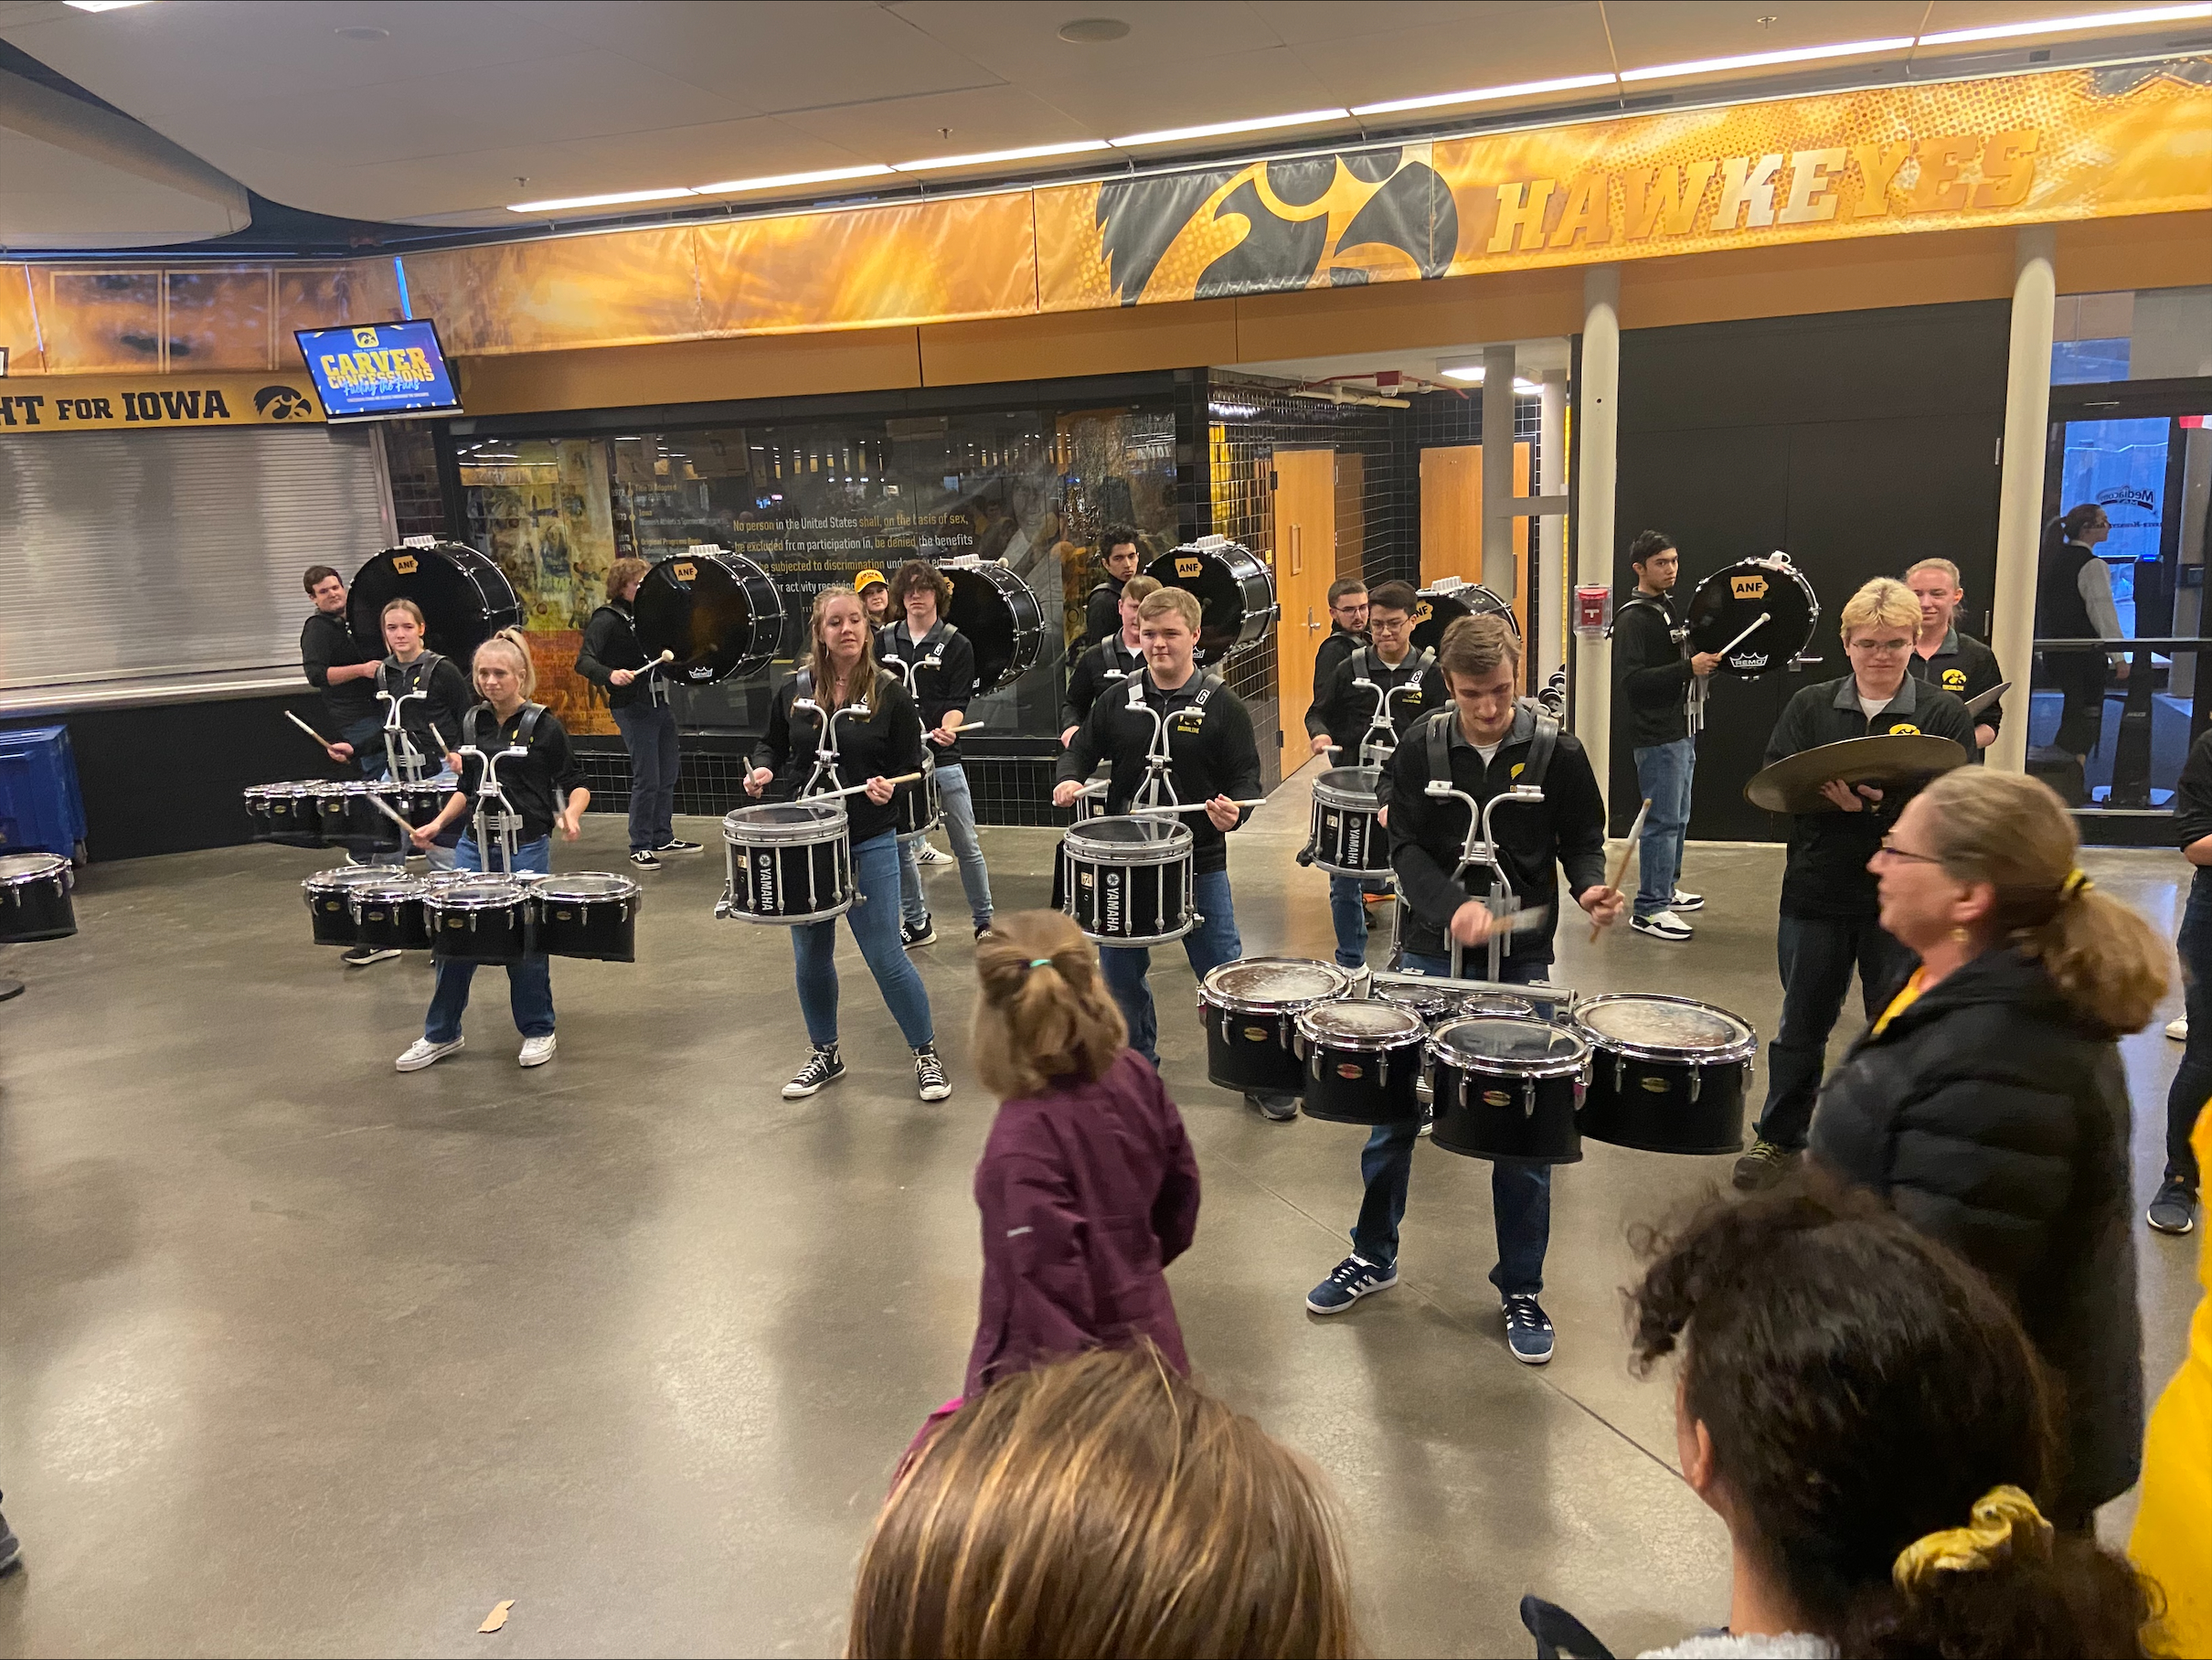 Black and Gold Drumline performing on the concourse at Carver Hawkeye Arena